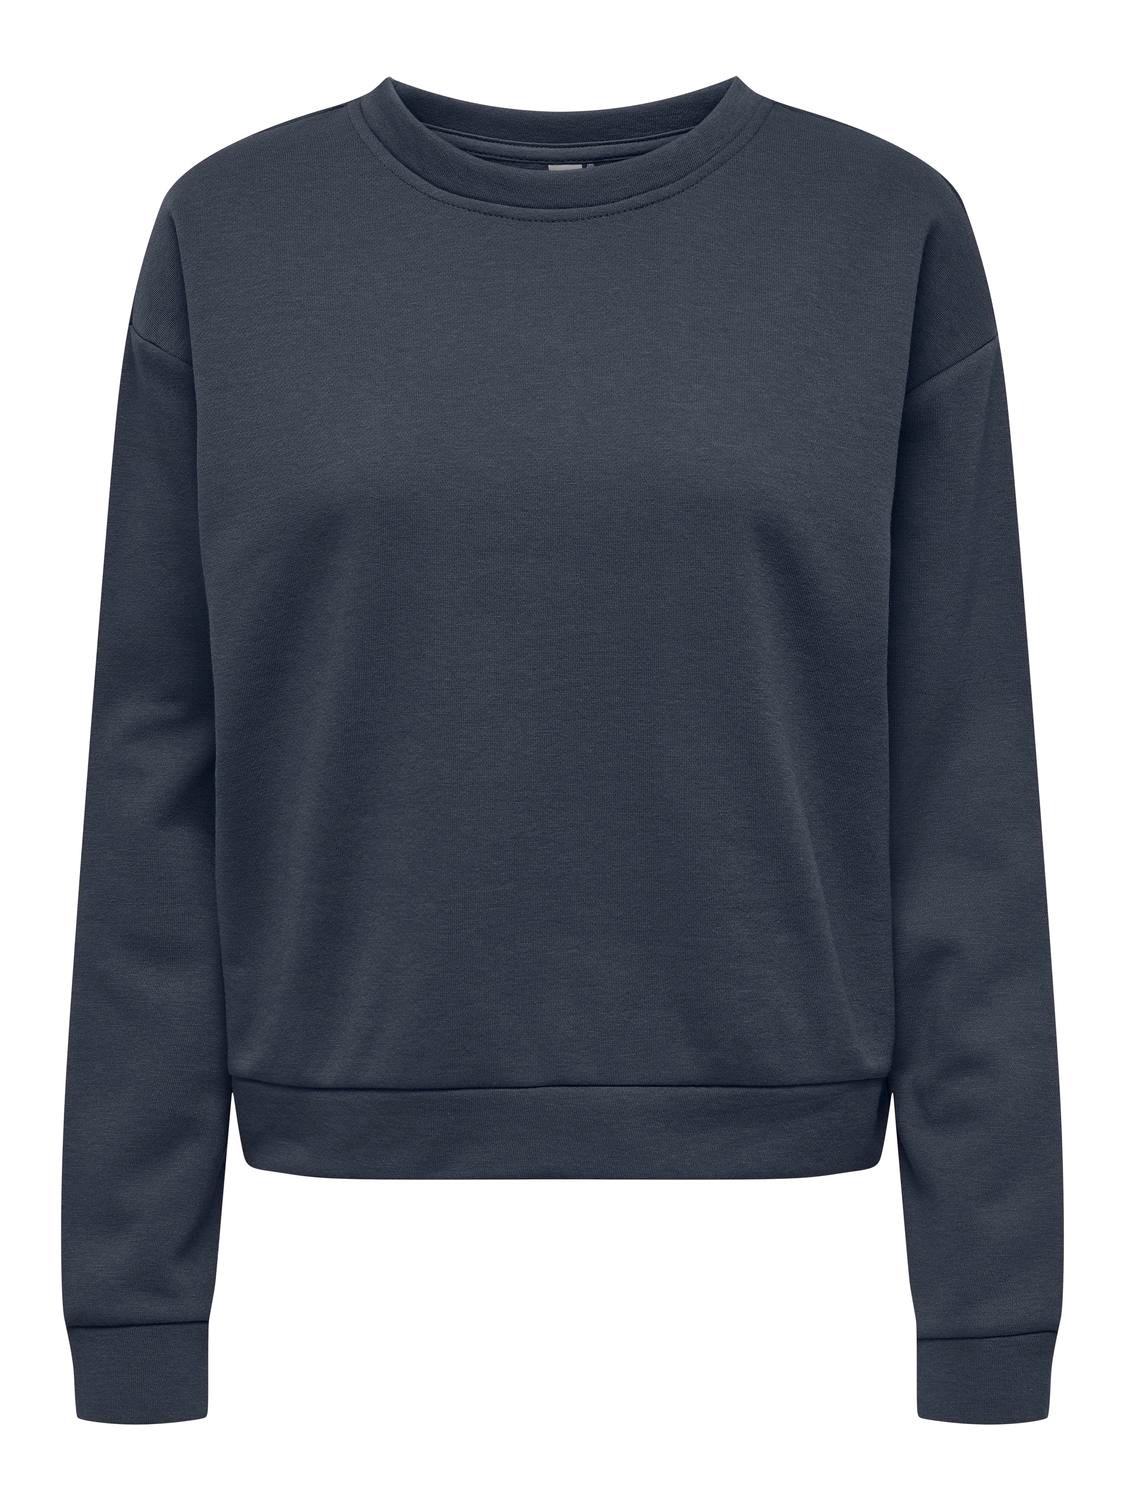 ONLY Sweat-shirt Regular Fit Col rond Épaules tombantes -Blue Nights - 15306488